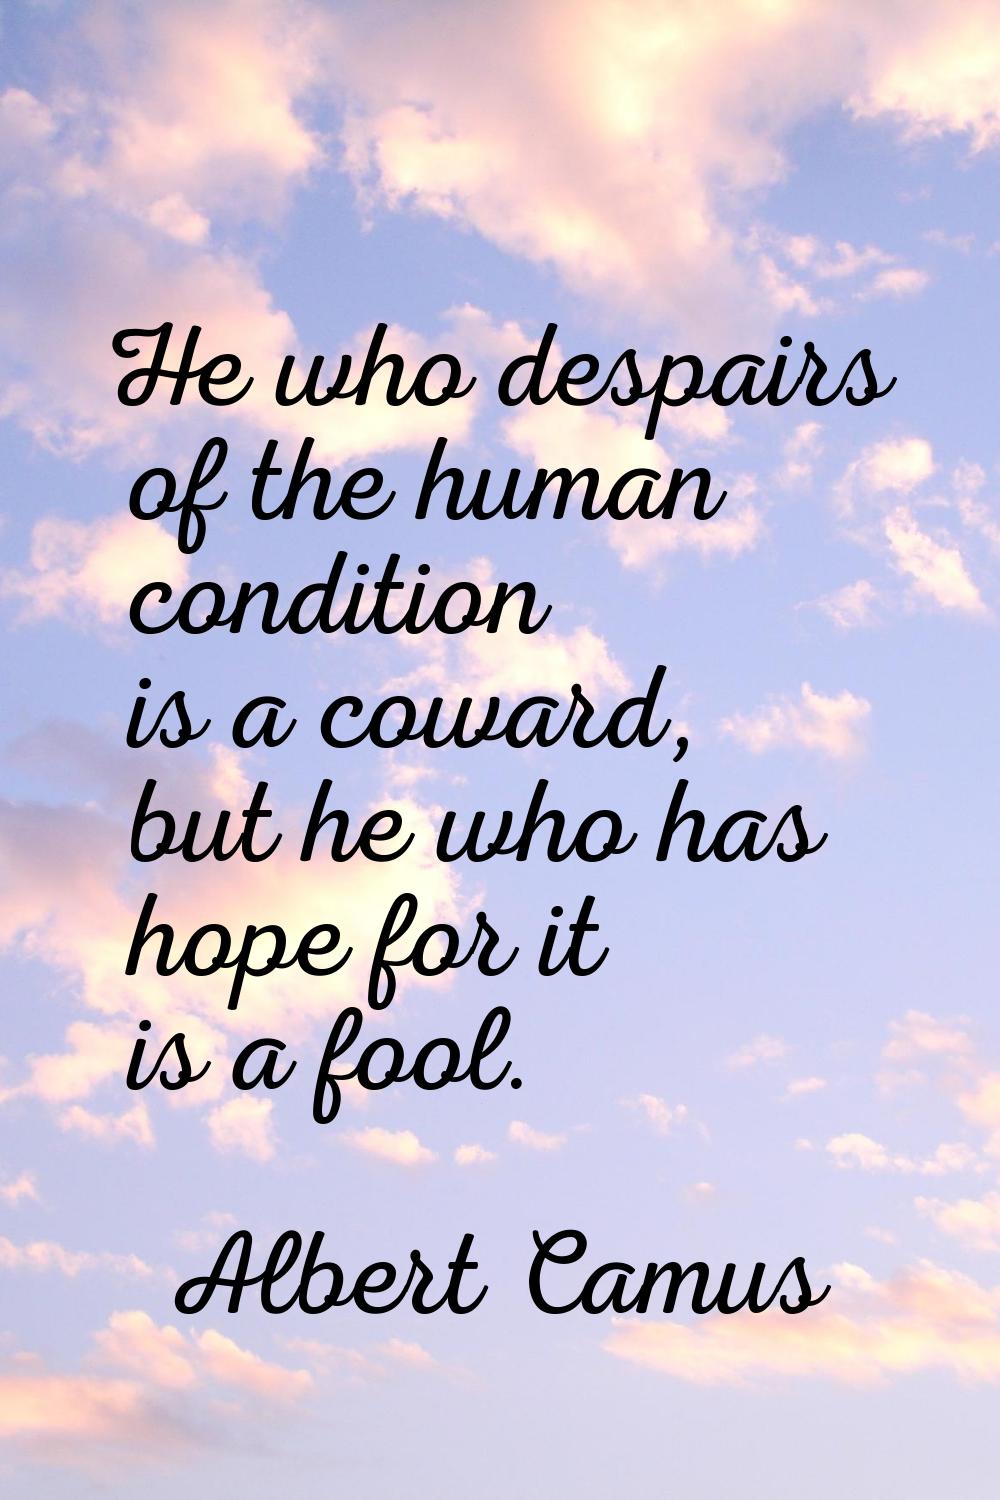 He who despairs of the human condition is a coward, but he who has hope for it is a fool.